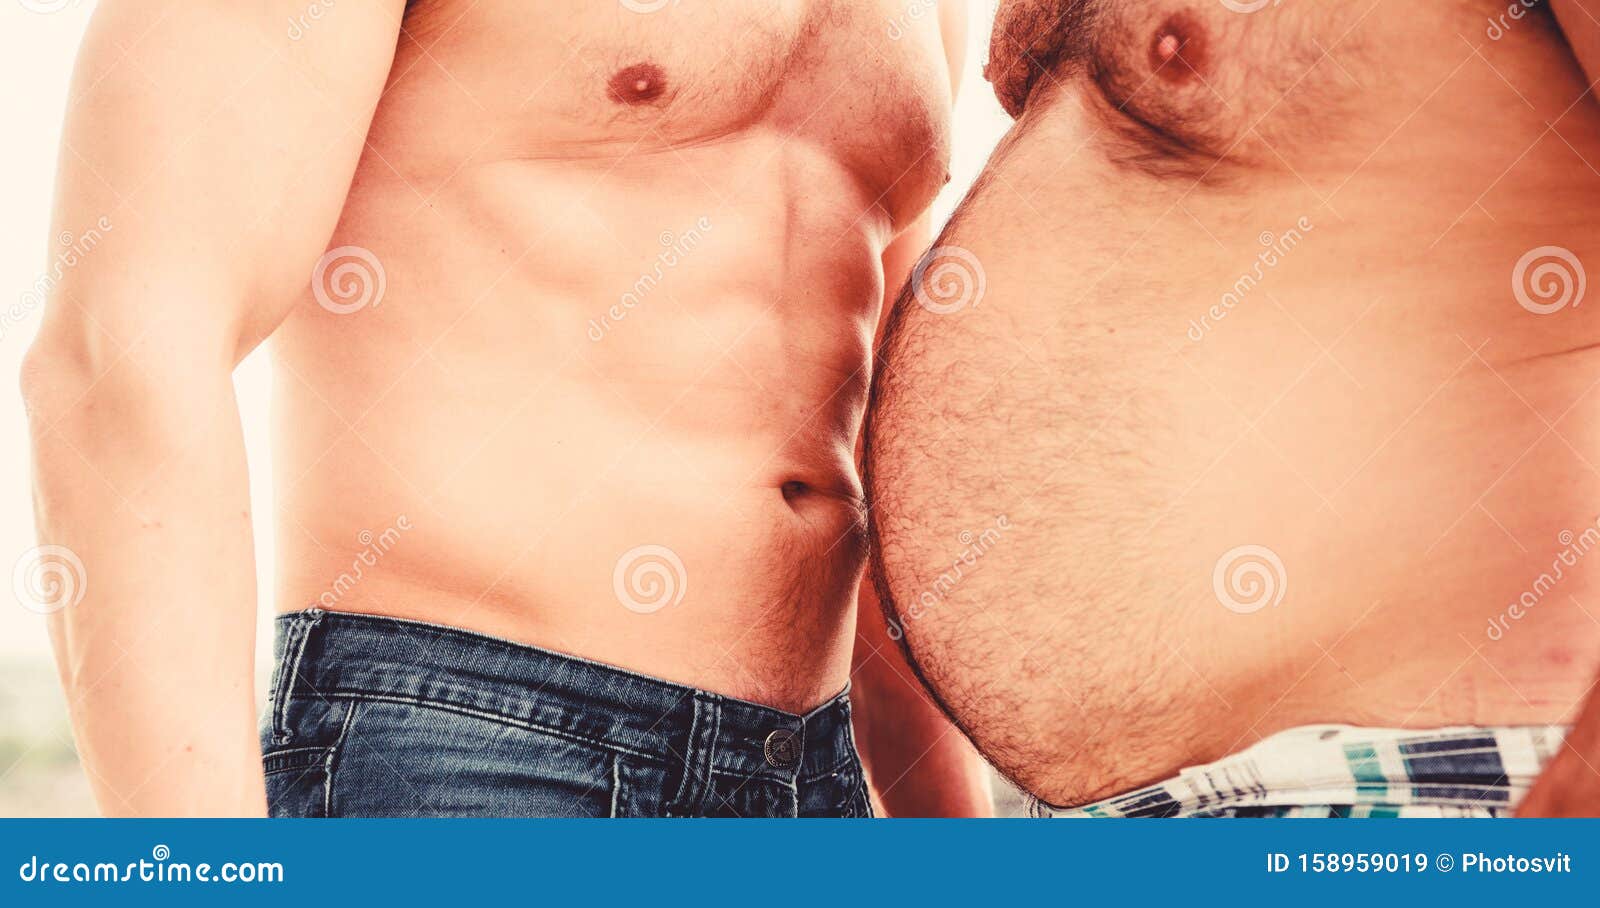 fat and slim. paunchy and slim bellies. bare torso and six packs or abs. muscular and fat. compare body s. perfect